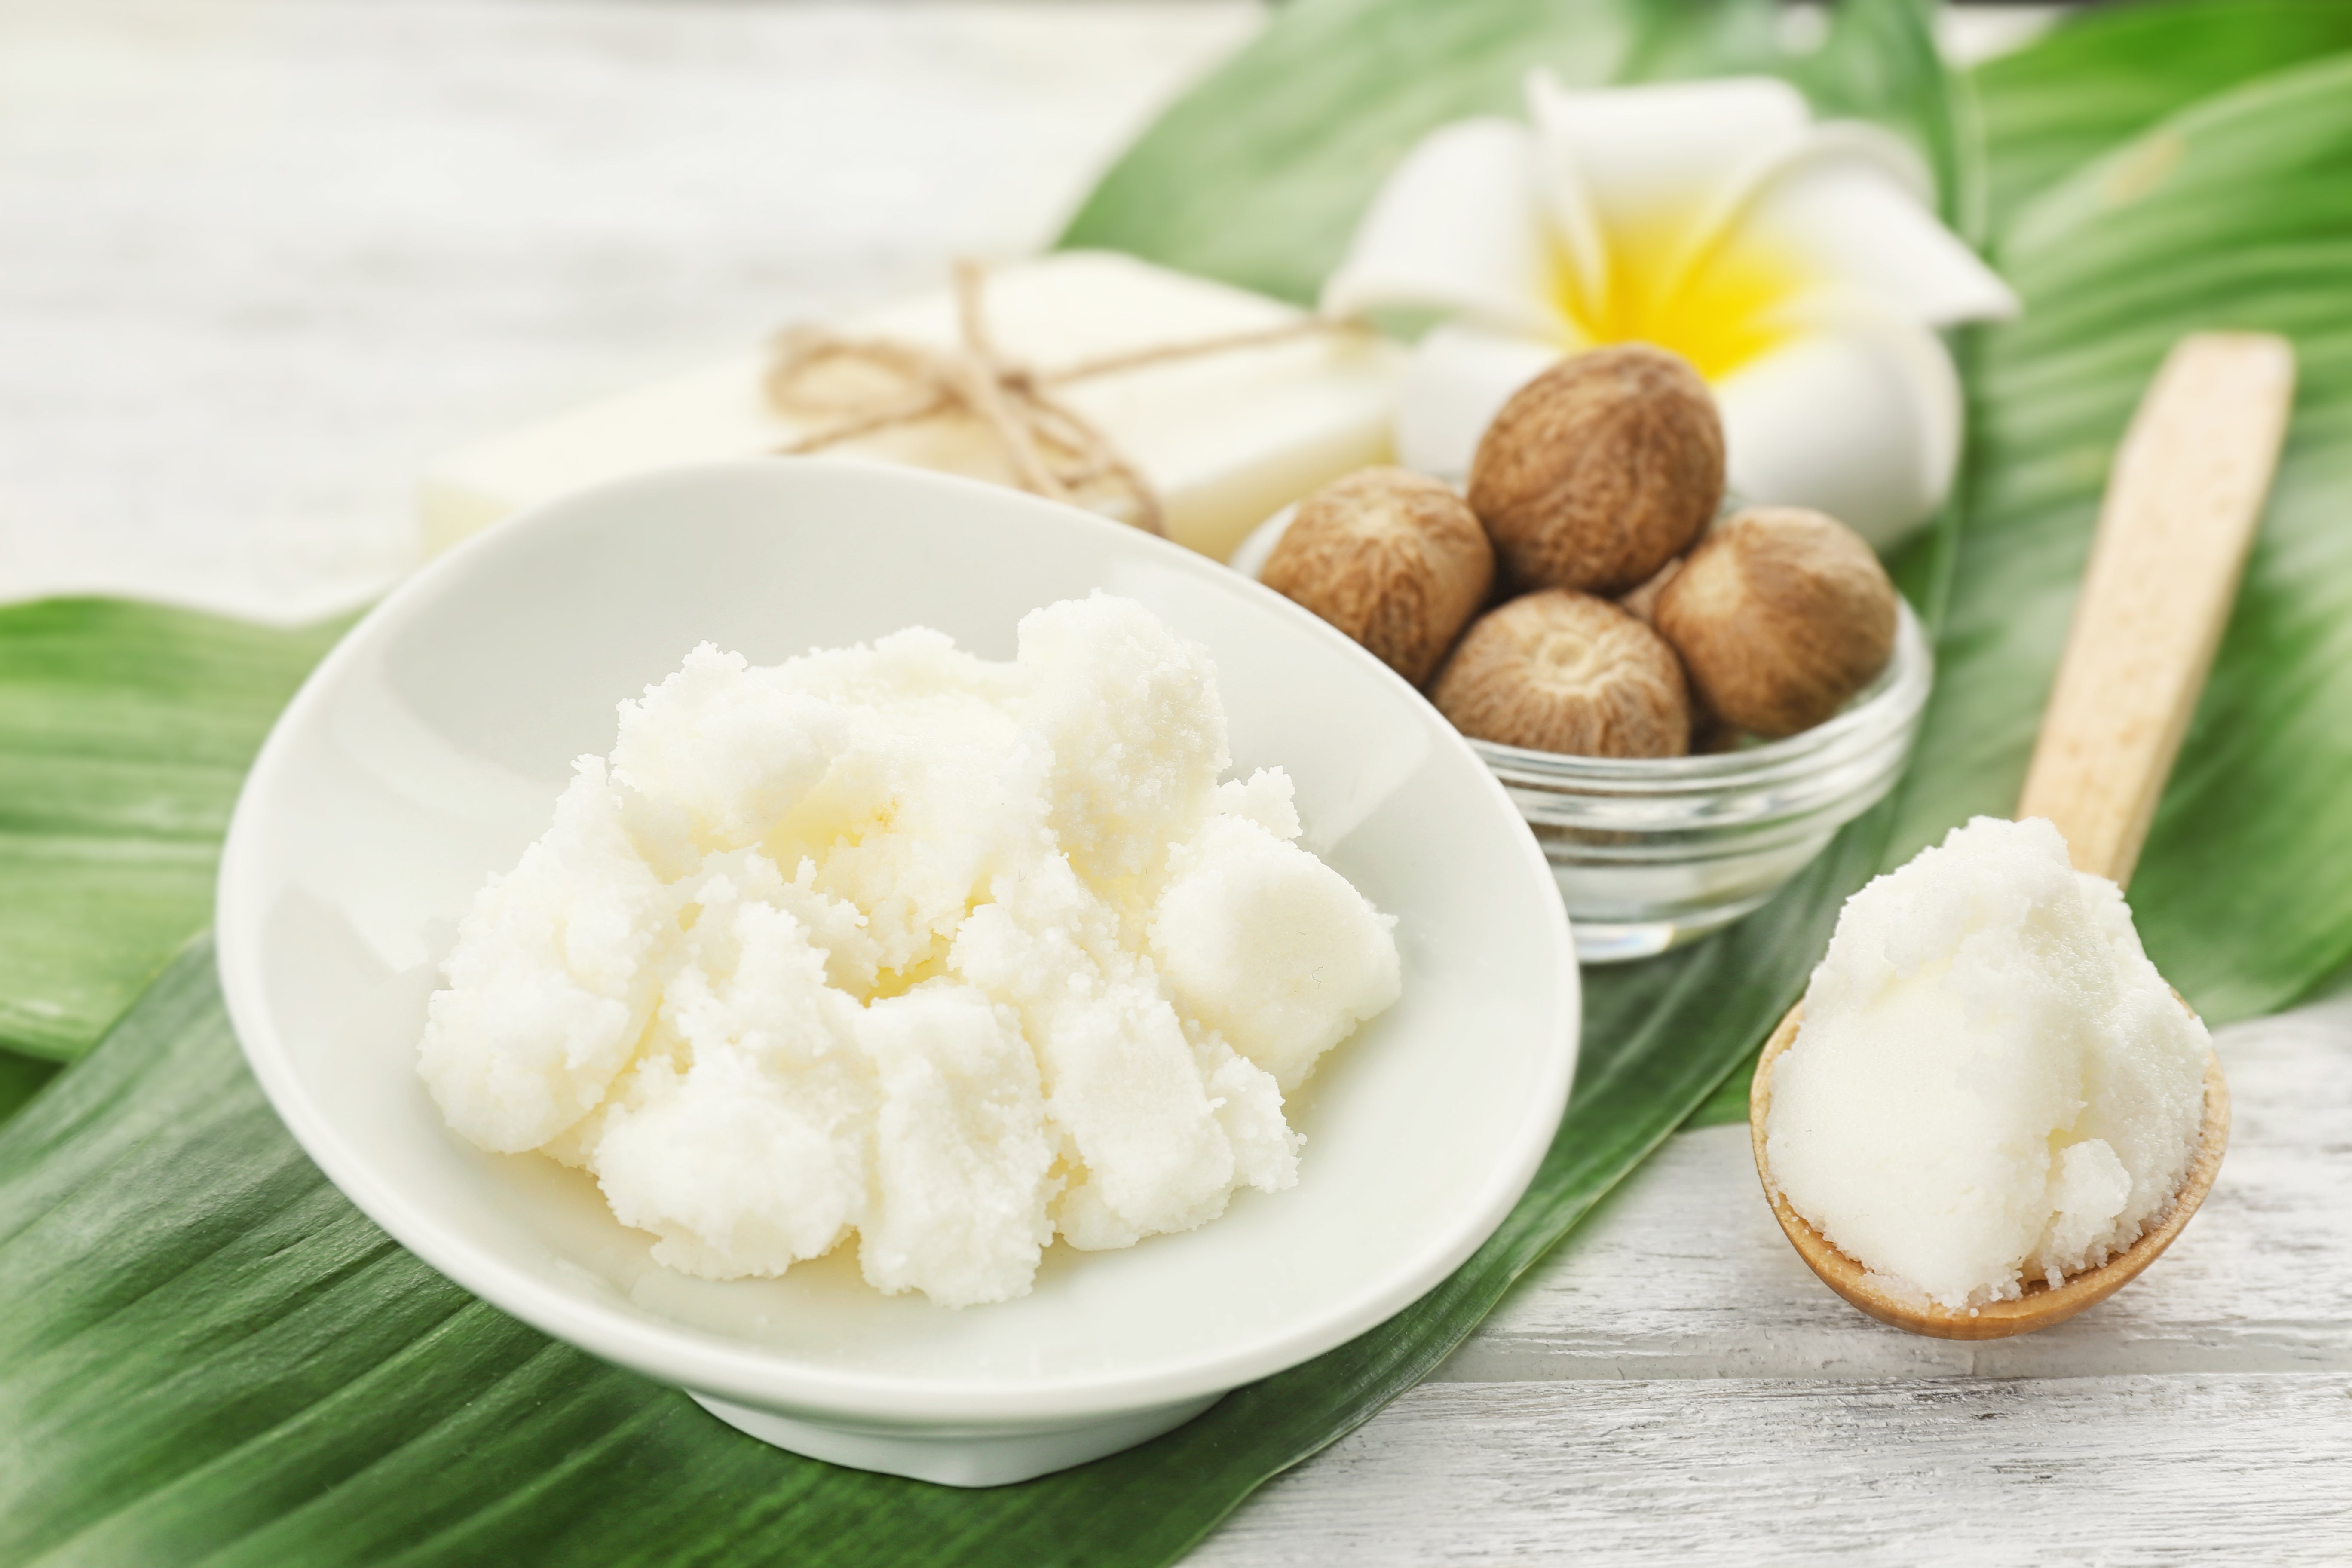  What Are the Benefits of Shea Butter for Face and Hair